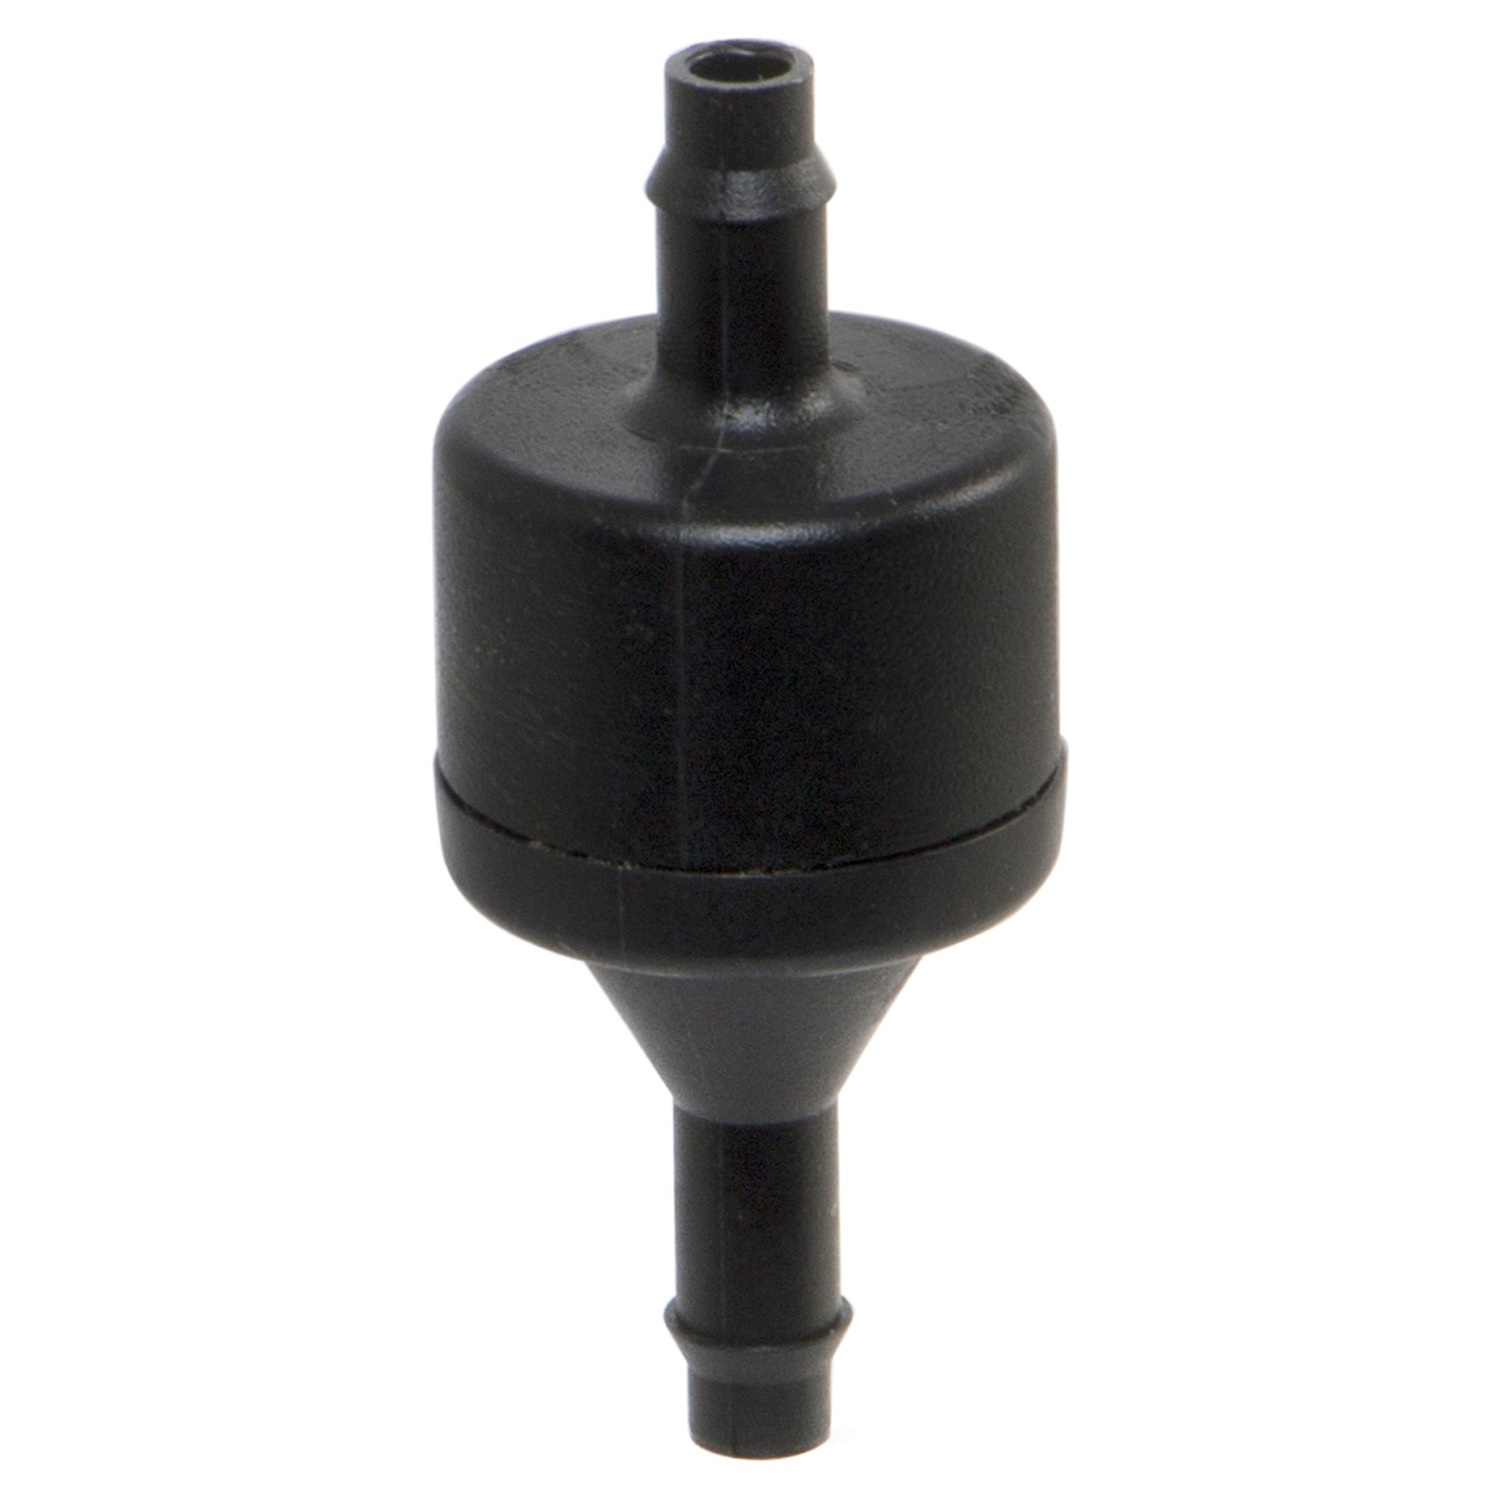 ANCO WIPER PRODUCTS - Windshield Washer Check Valve - ANC 48-21